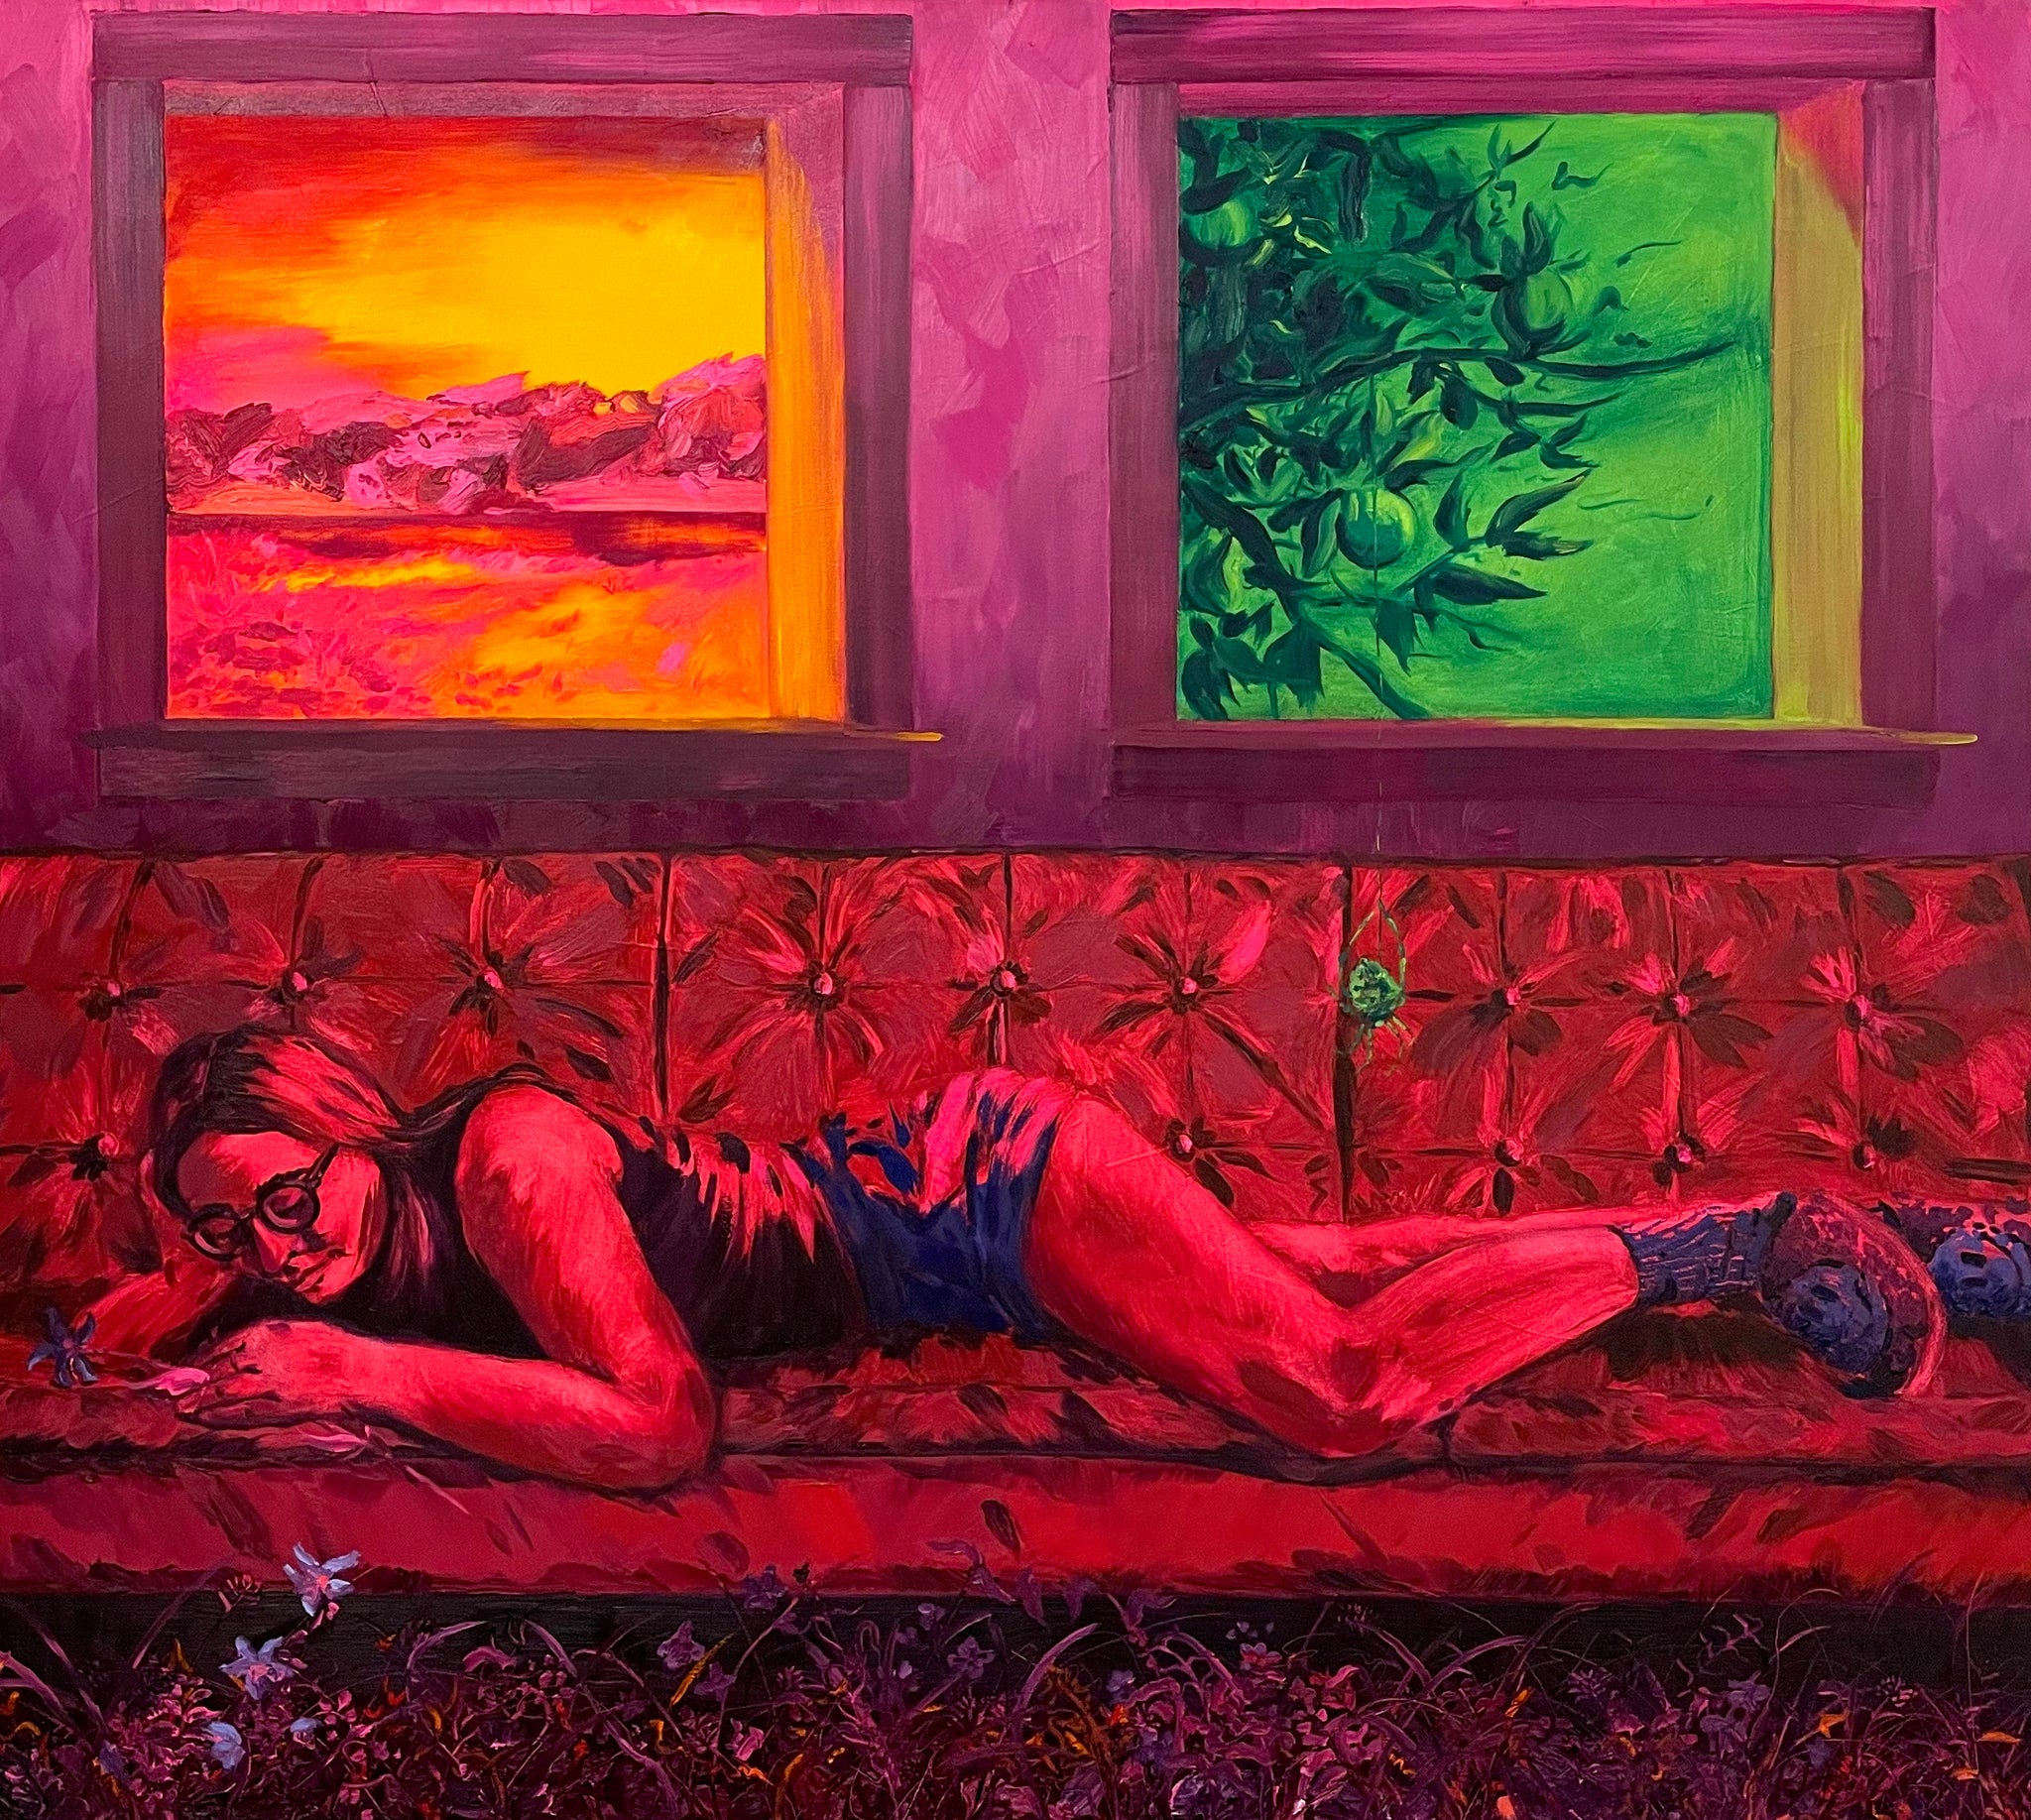 Emily Stroud, "Red Afternoon"